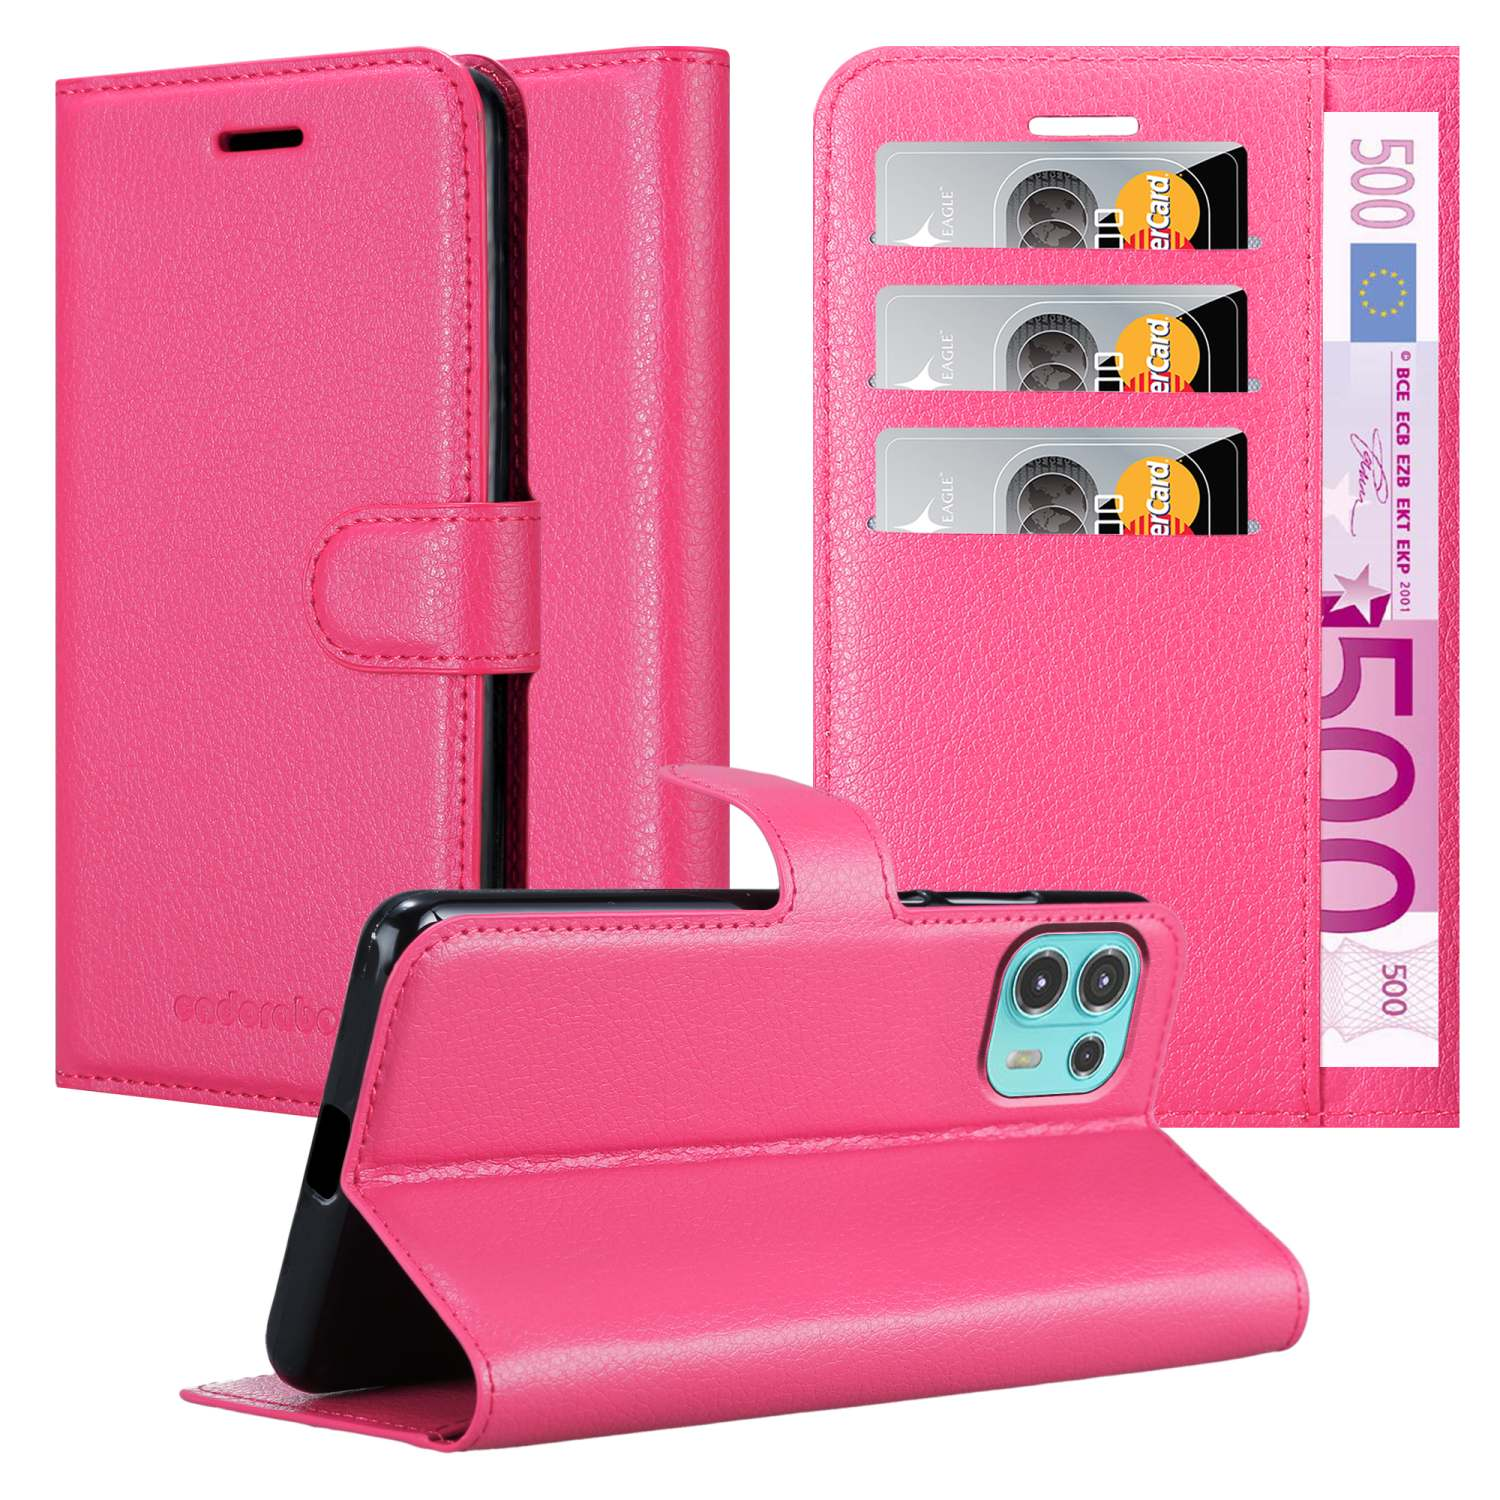 20 LITE Book / FUSION, CHERRY Bookcover, EDGE PINK Motorola, Hülle CADORABO Standfunktion,